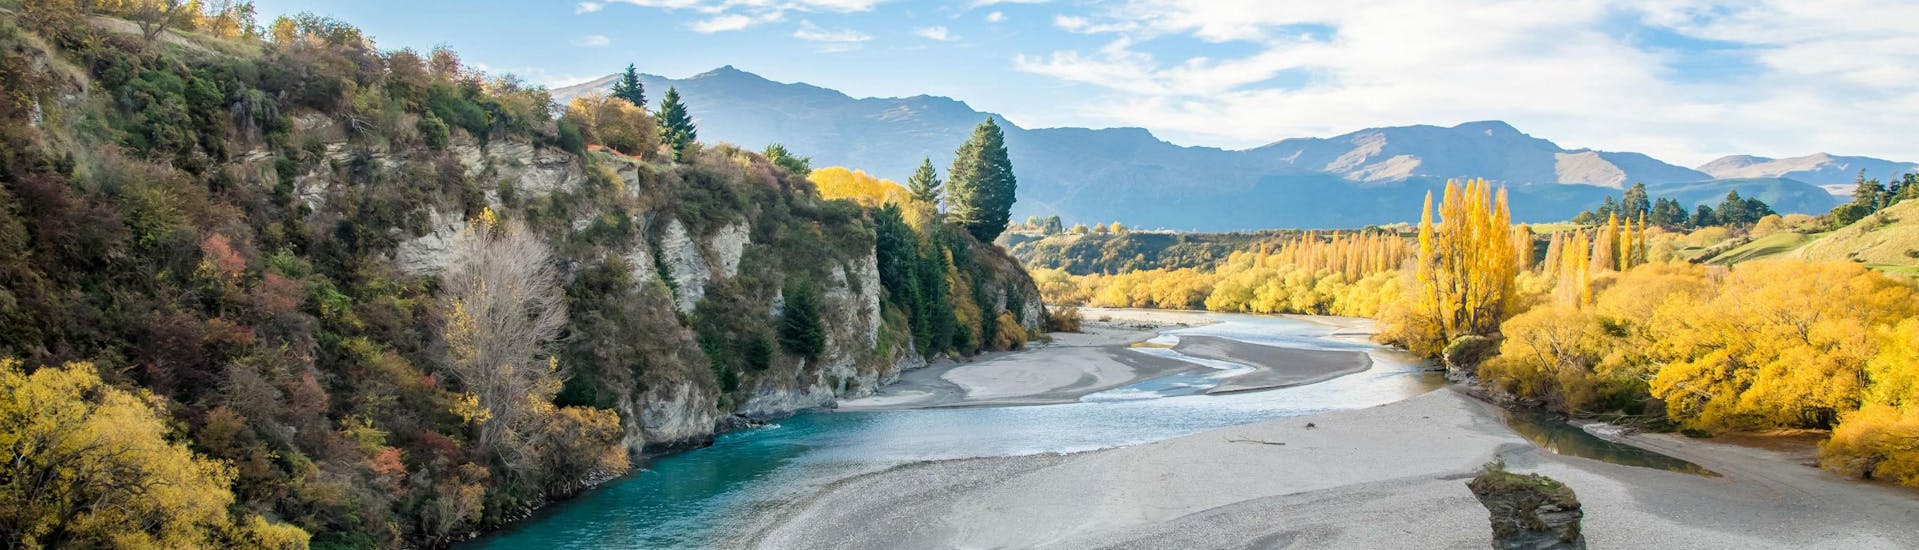 A view of the beautiful Shotover River that visitors paddle along when rafting in Queenstown.